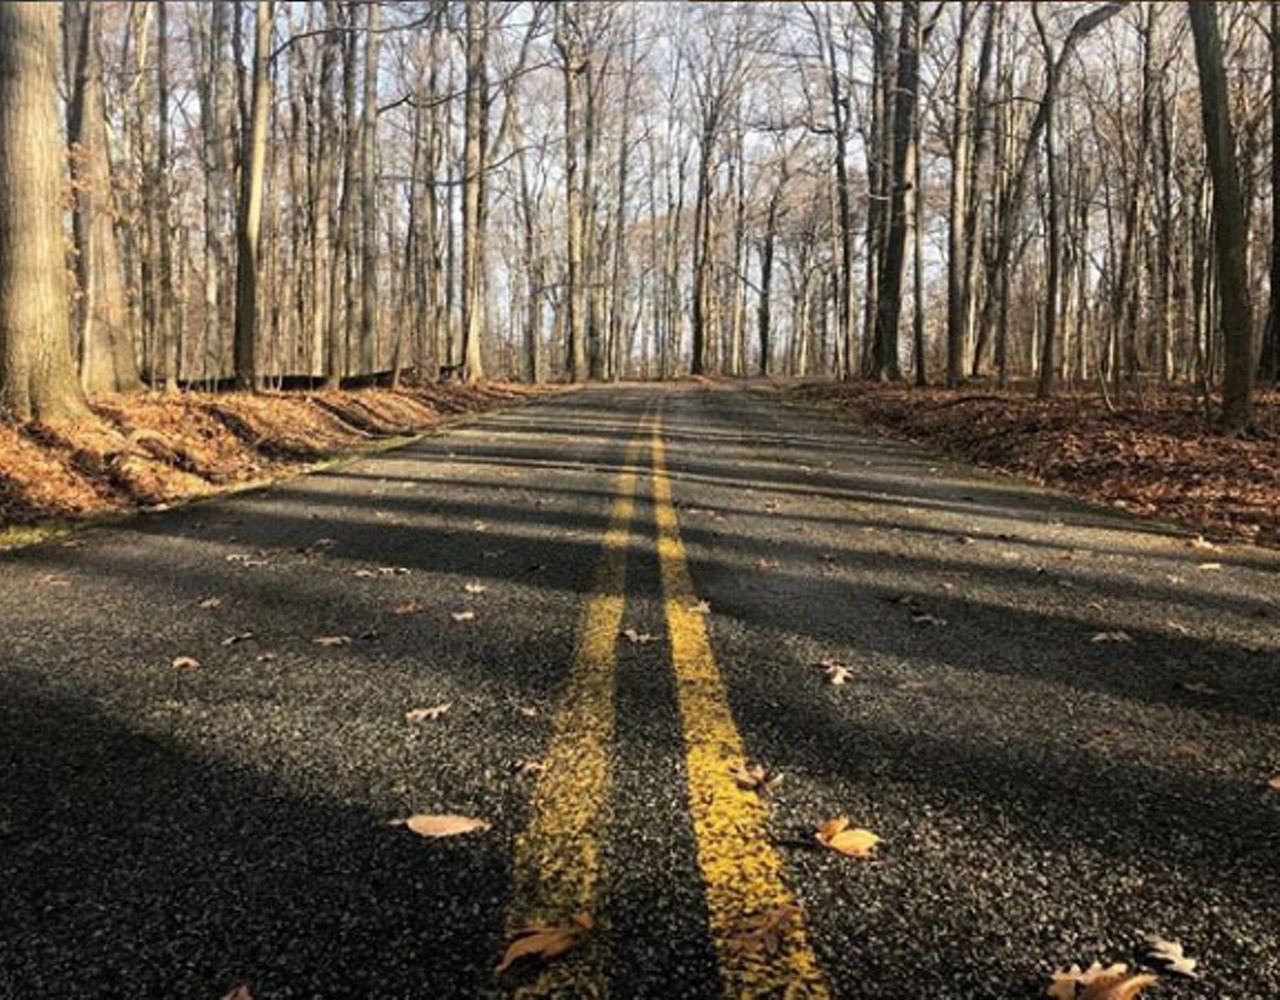 Chapin Forest Reservation
9938 Chillicothe Rd., 440-639-7275  
With six miles of trail, this reservation is open year-round for entertainment. Hike, run or ski through the thick forest, or check out Lucky Stone Loop trail for a spectacular view of Lake Erie.
Photo via bri_gavin13/Instagram